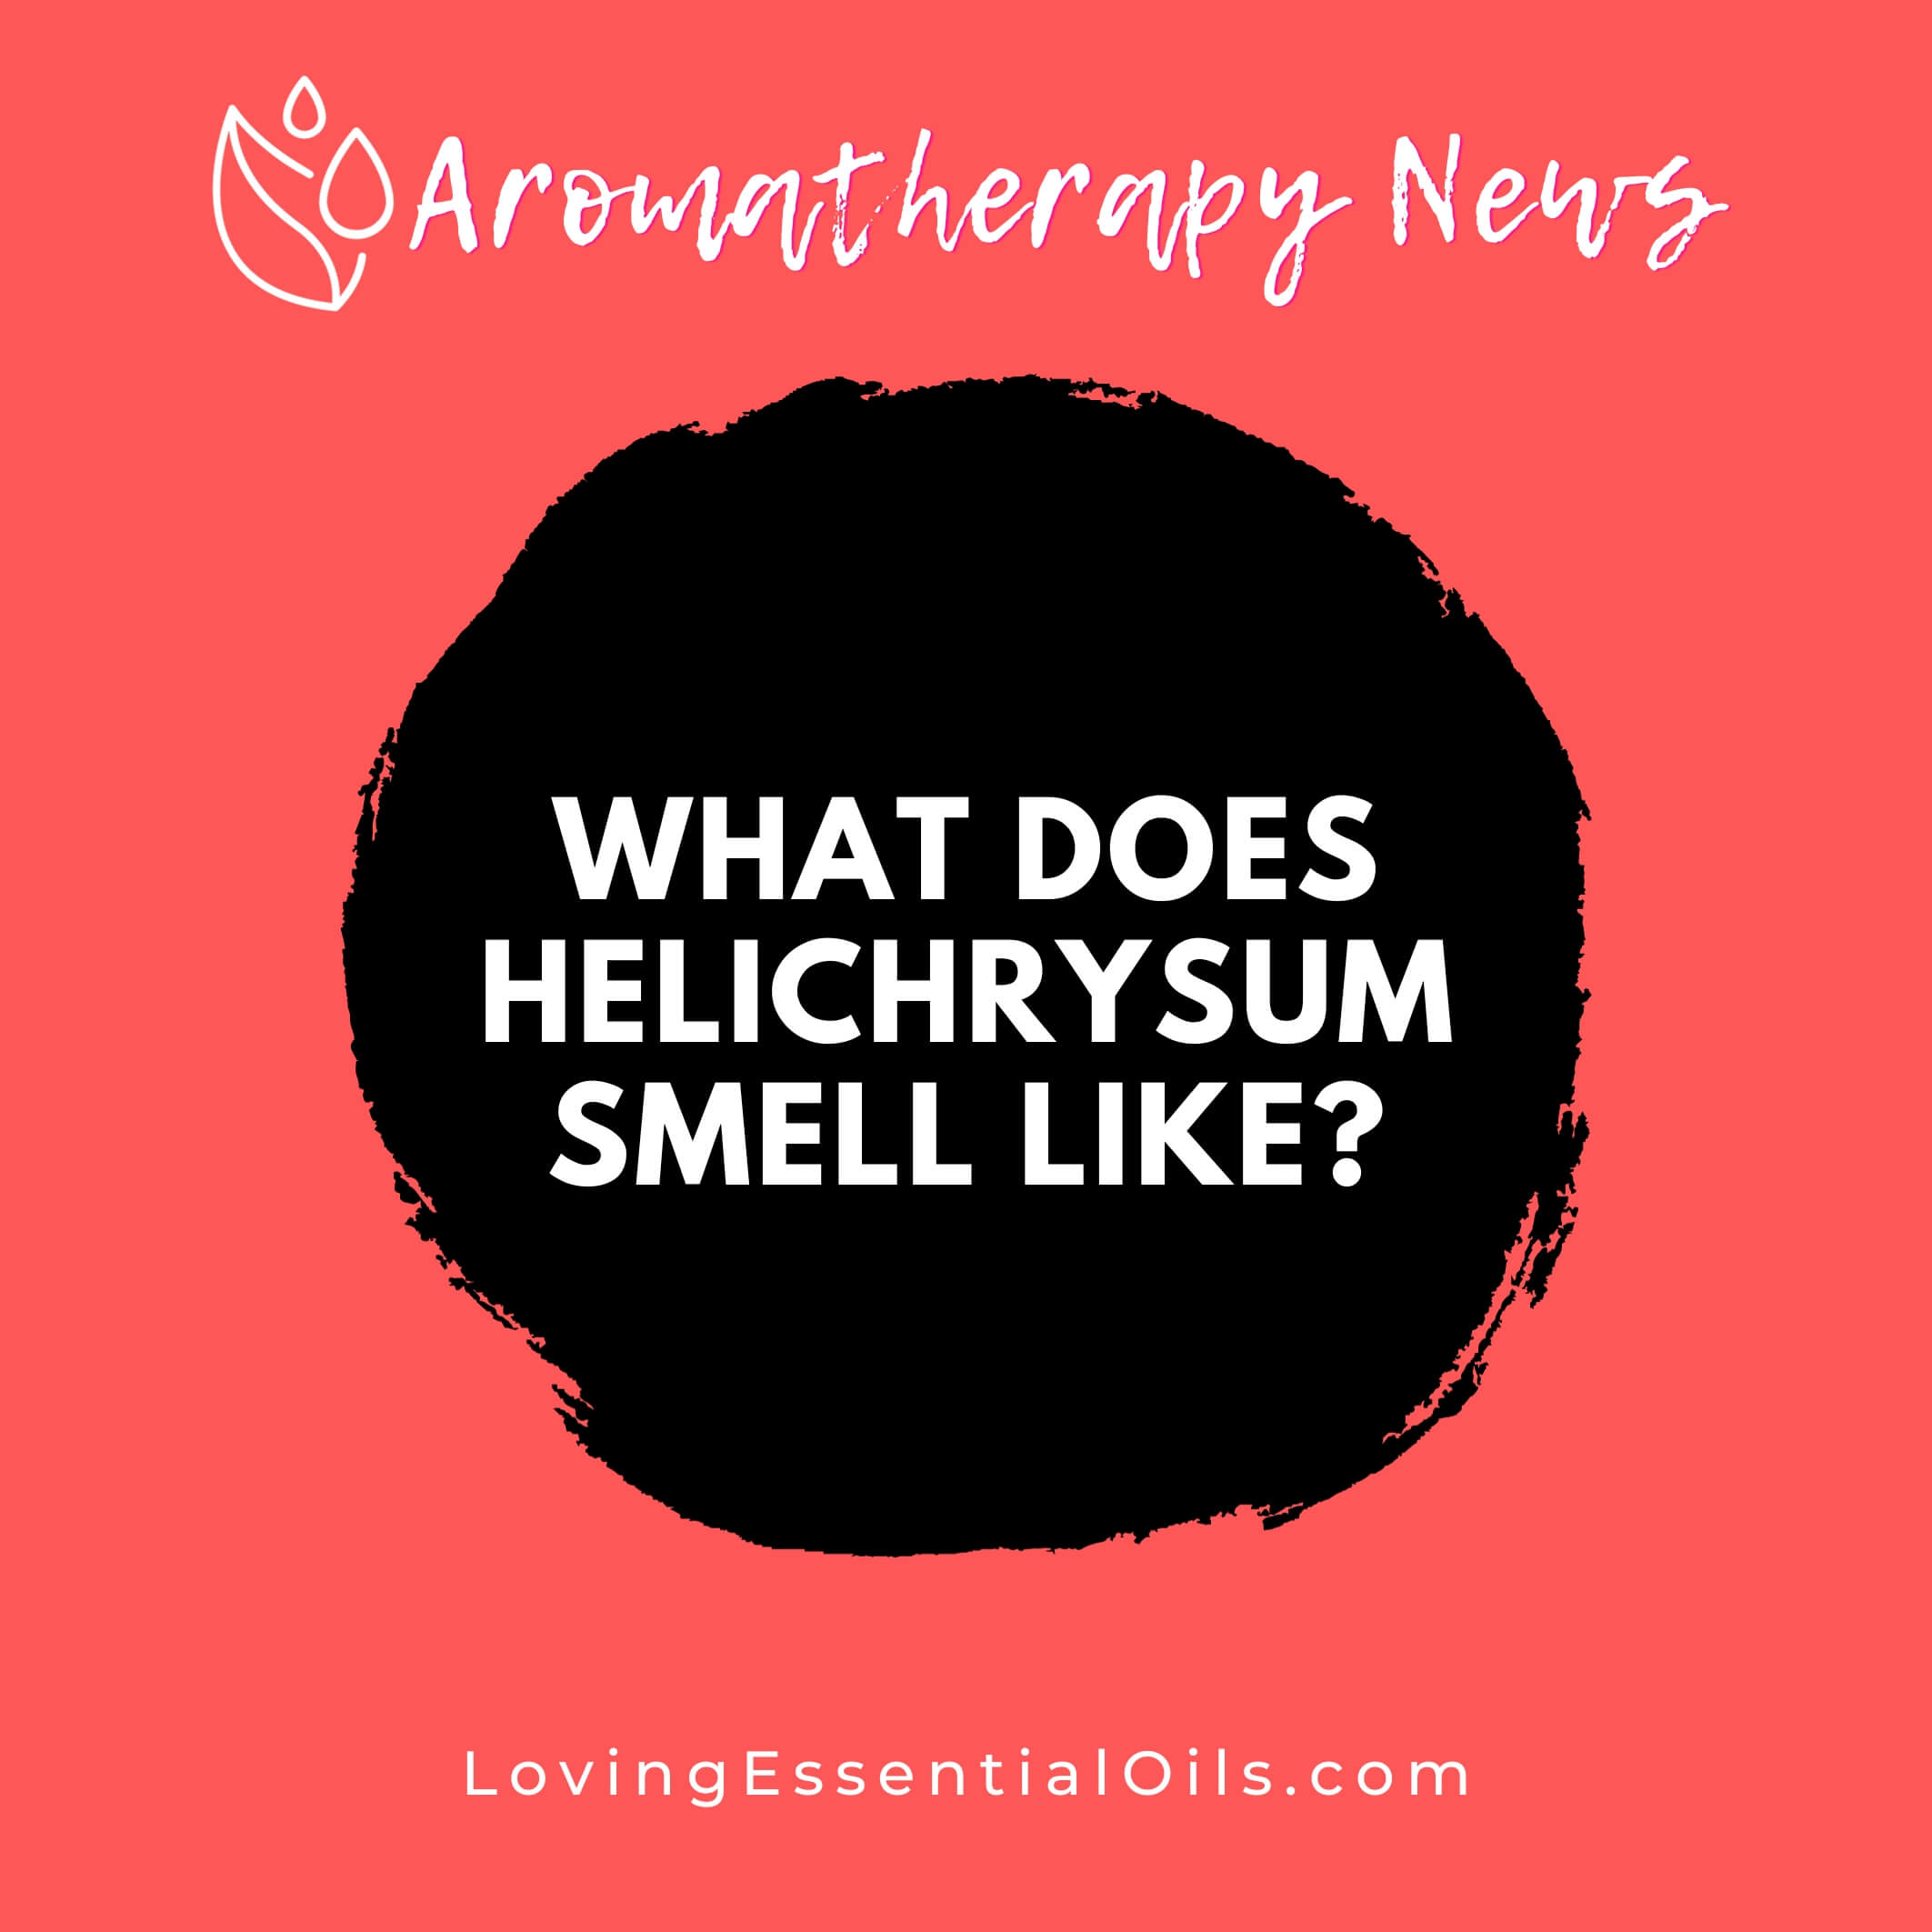 What Does Helichrysum Smell Like? Everlasting Scent by Loving Essential Oils